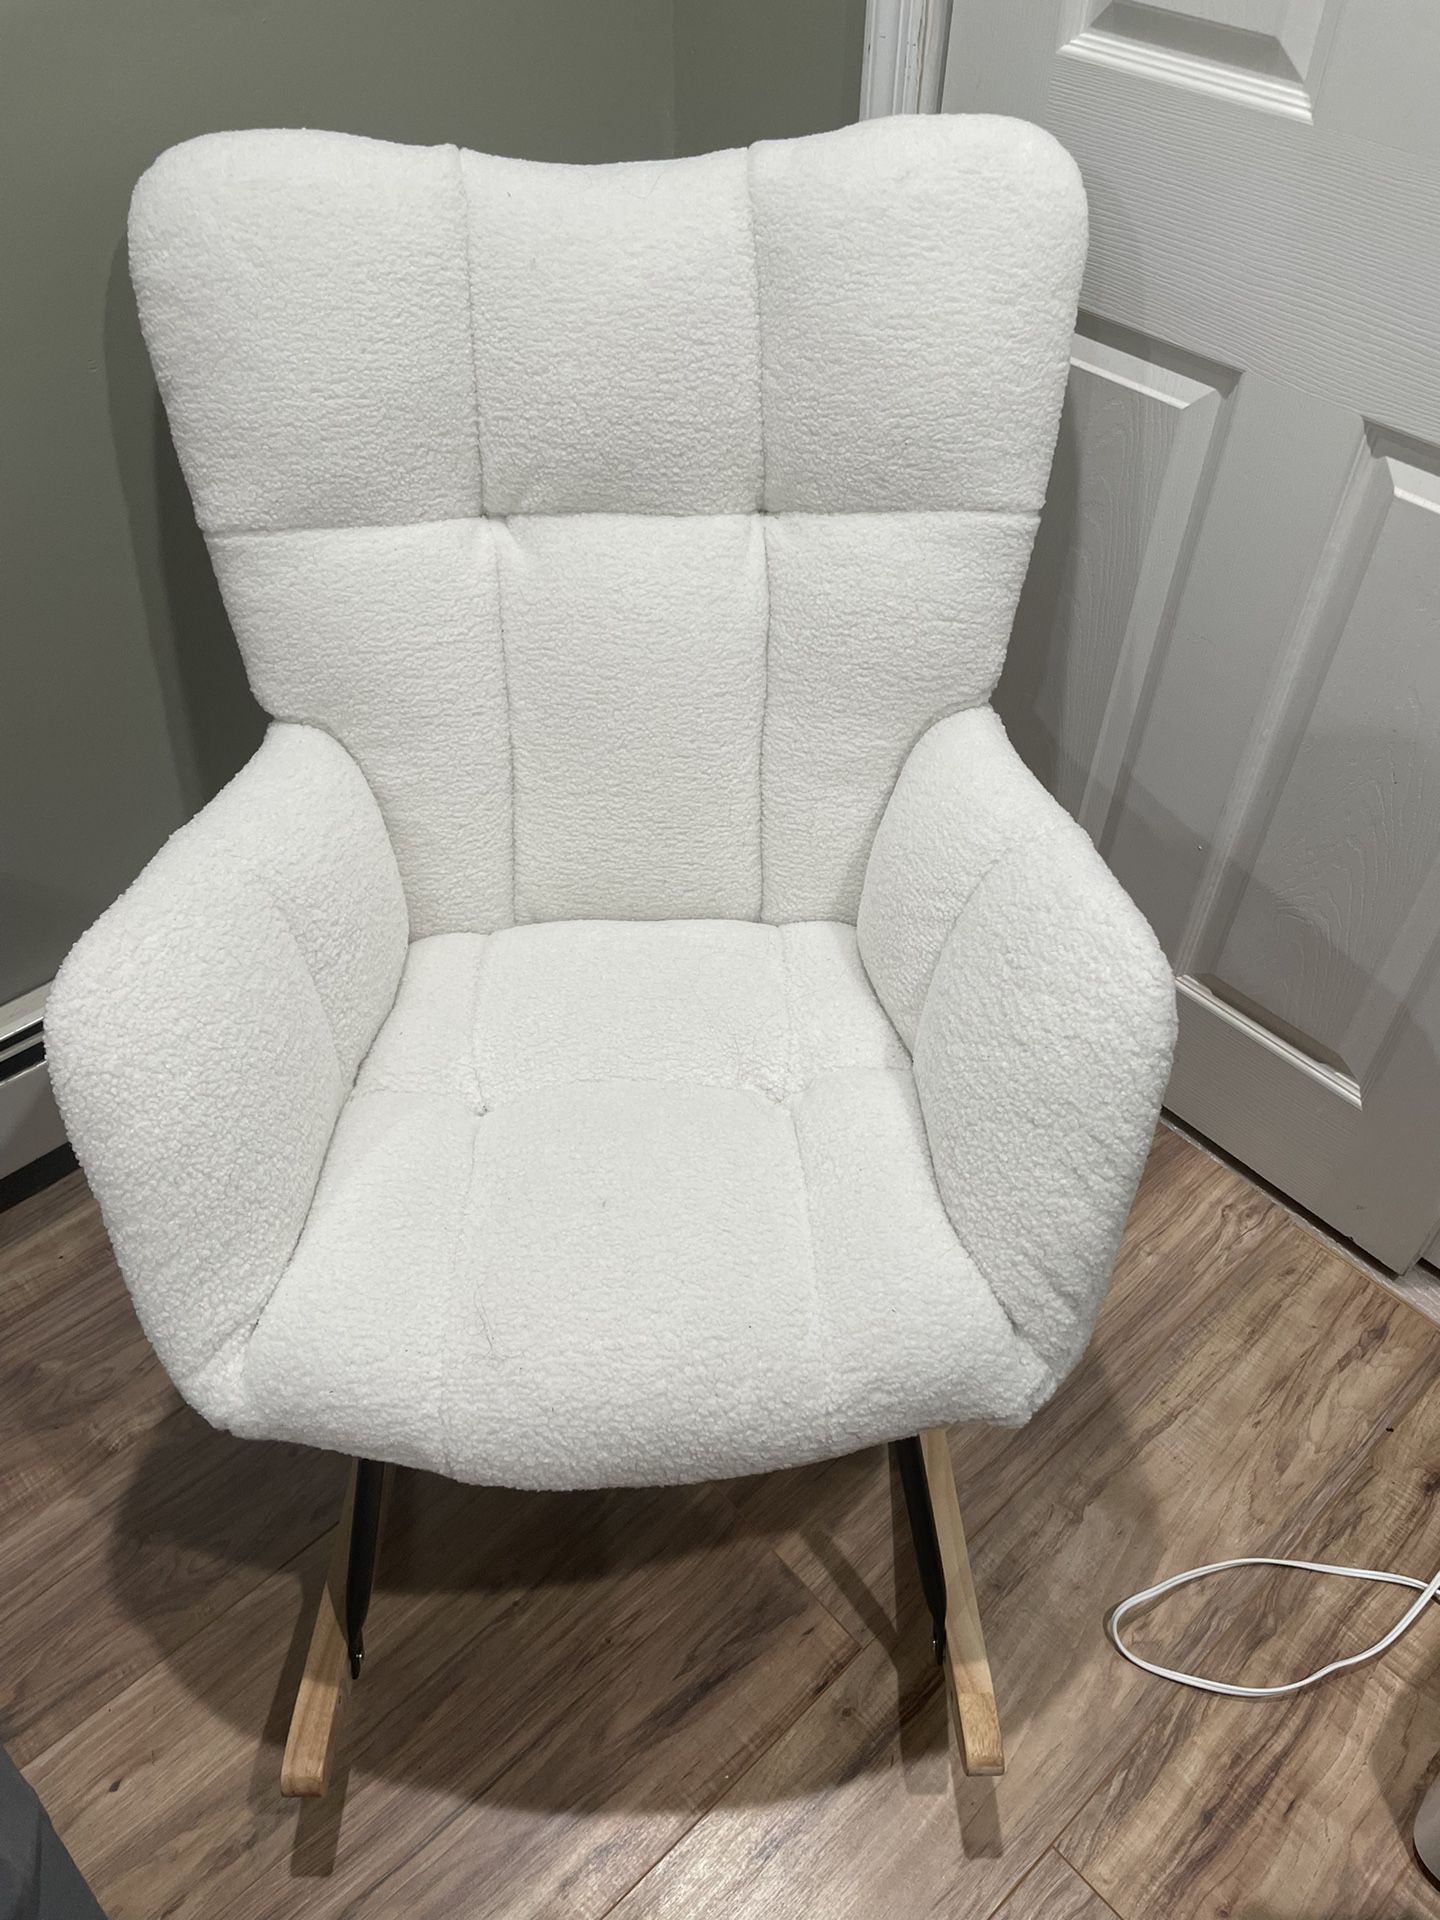 Nursery Rocking Chair Teddy Upholstered Glider Rocker Rocking Accent Chair Padded Seat with High Backrest Armchair Comfy Side Chair for Living Room Be